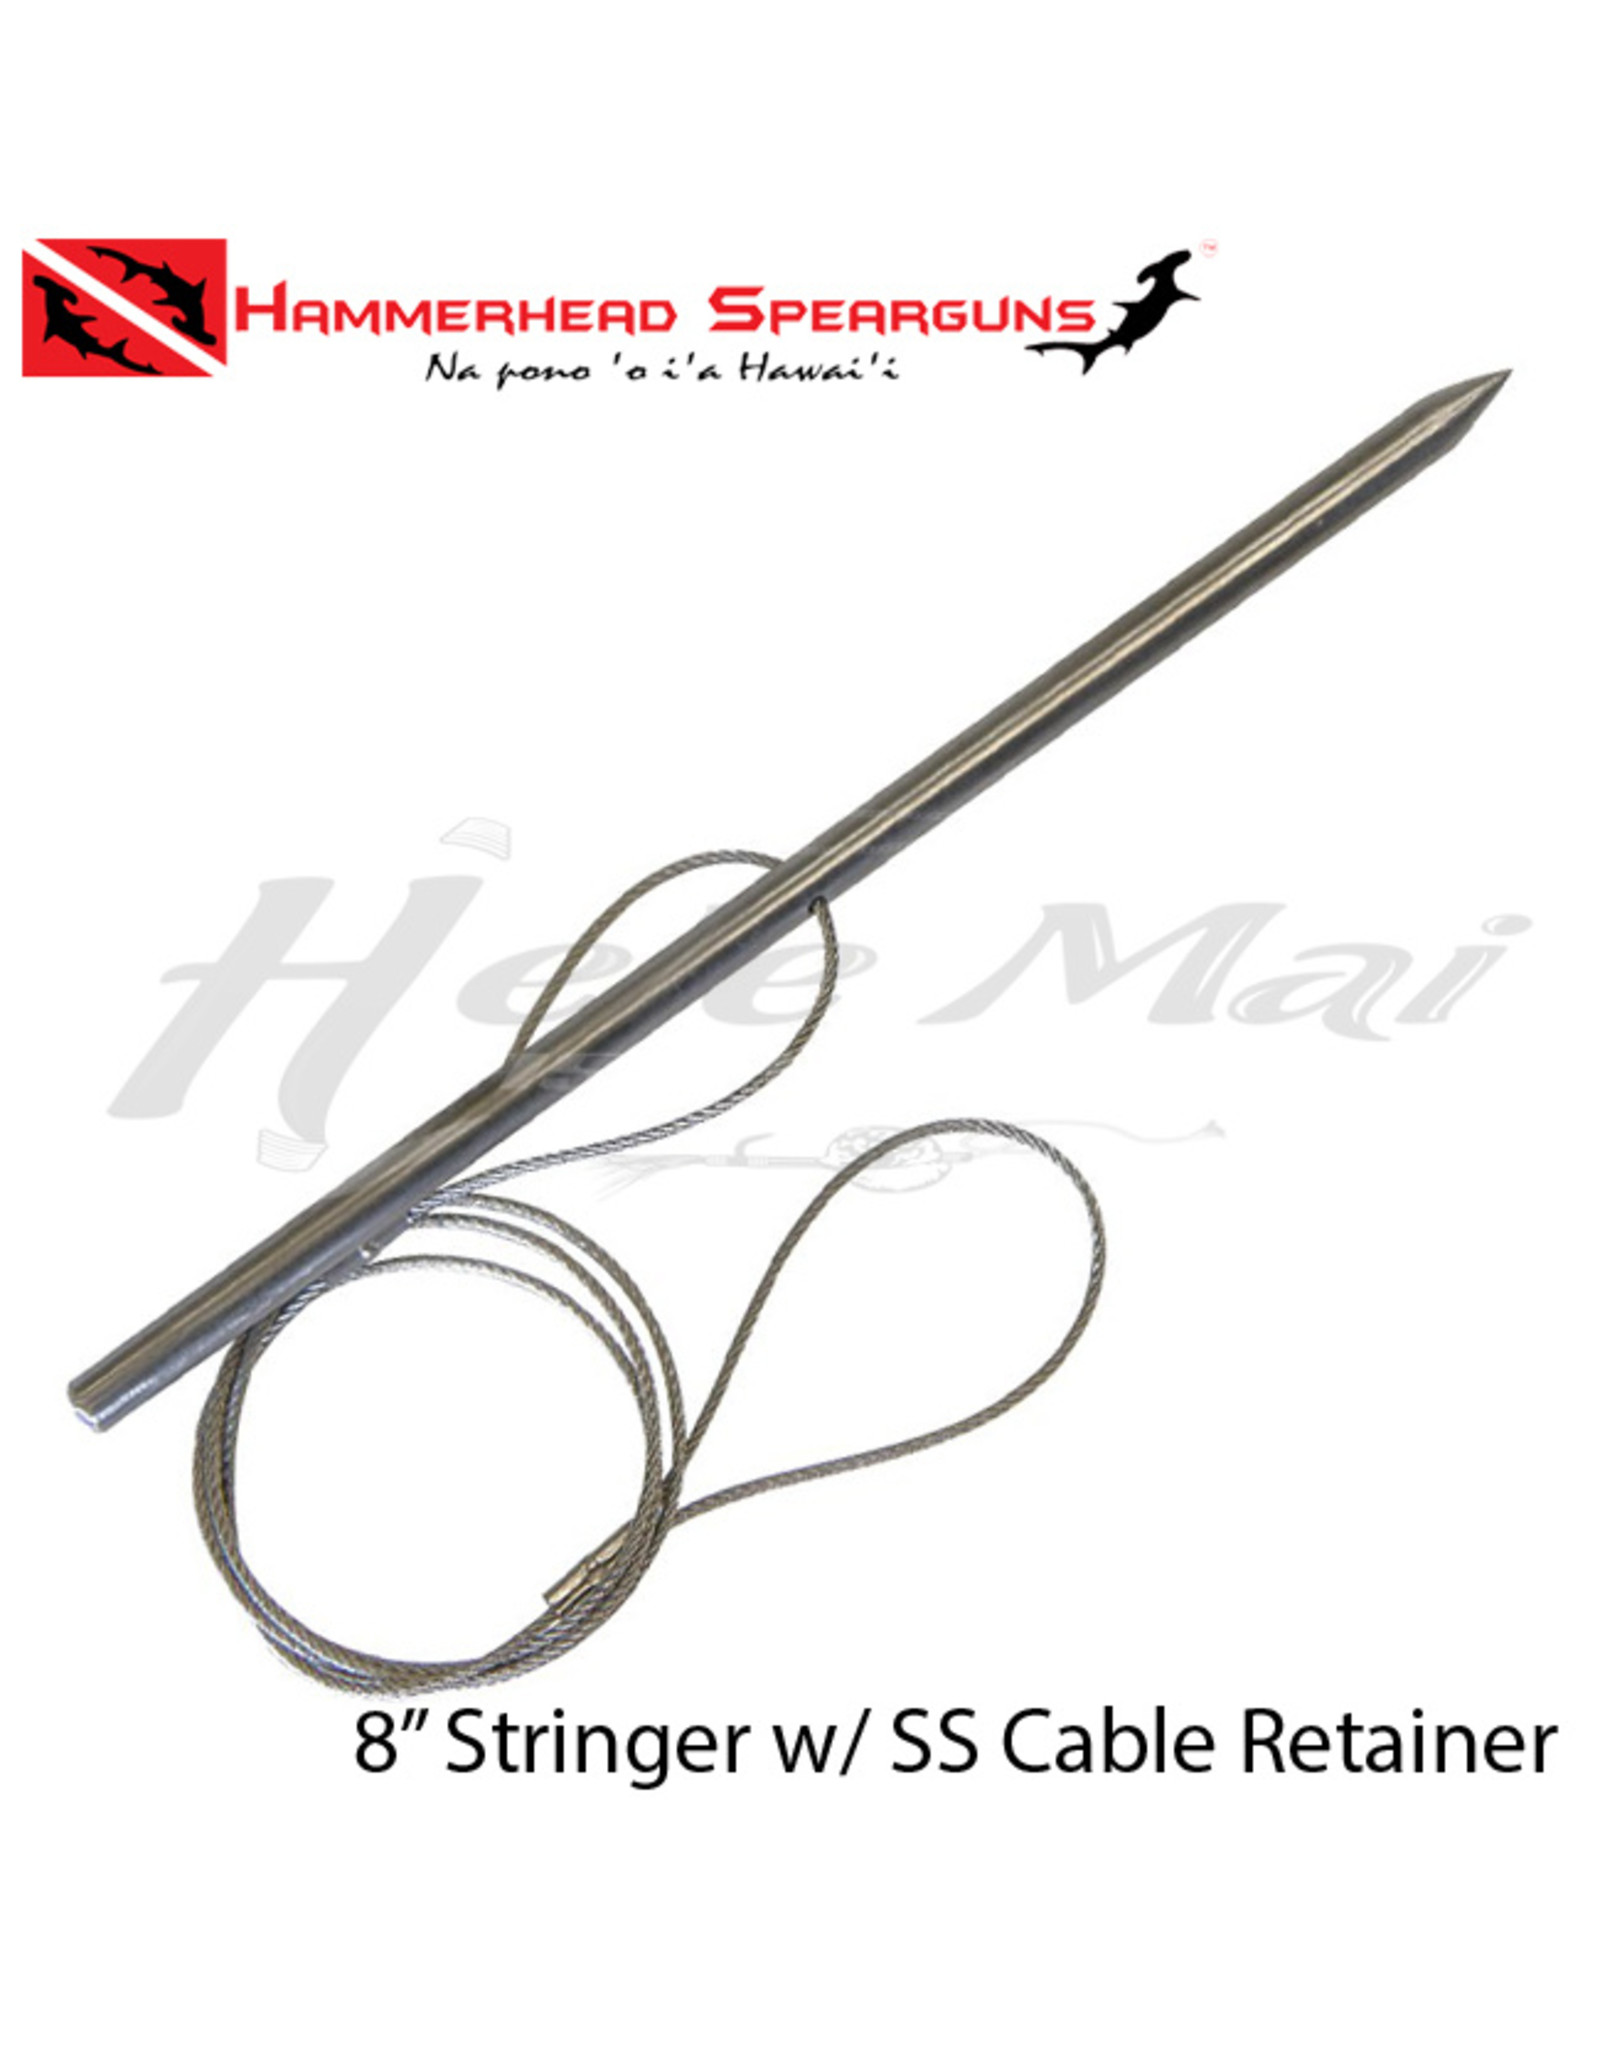 8 STRINGER, SS CABLE RETAINER - Hele Mai Fishing Supply